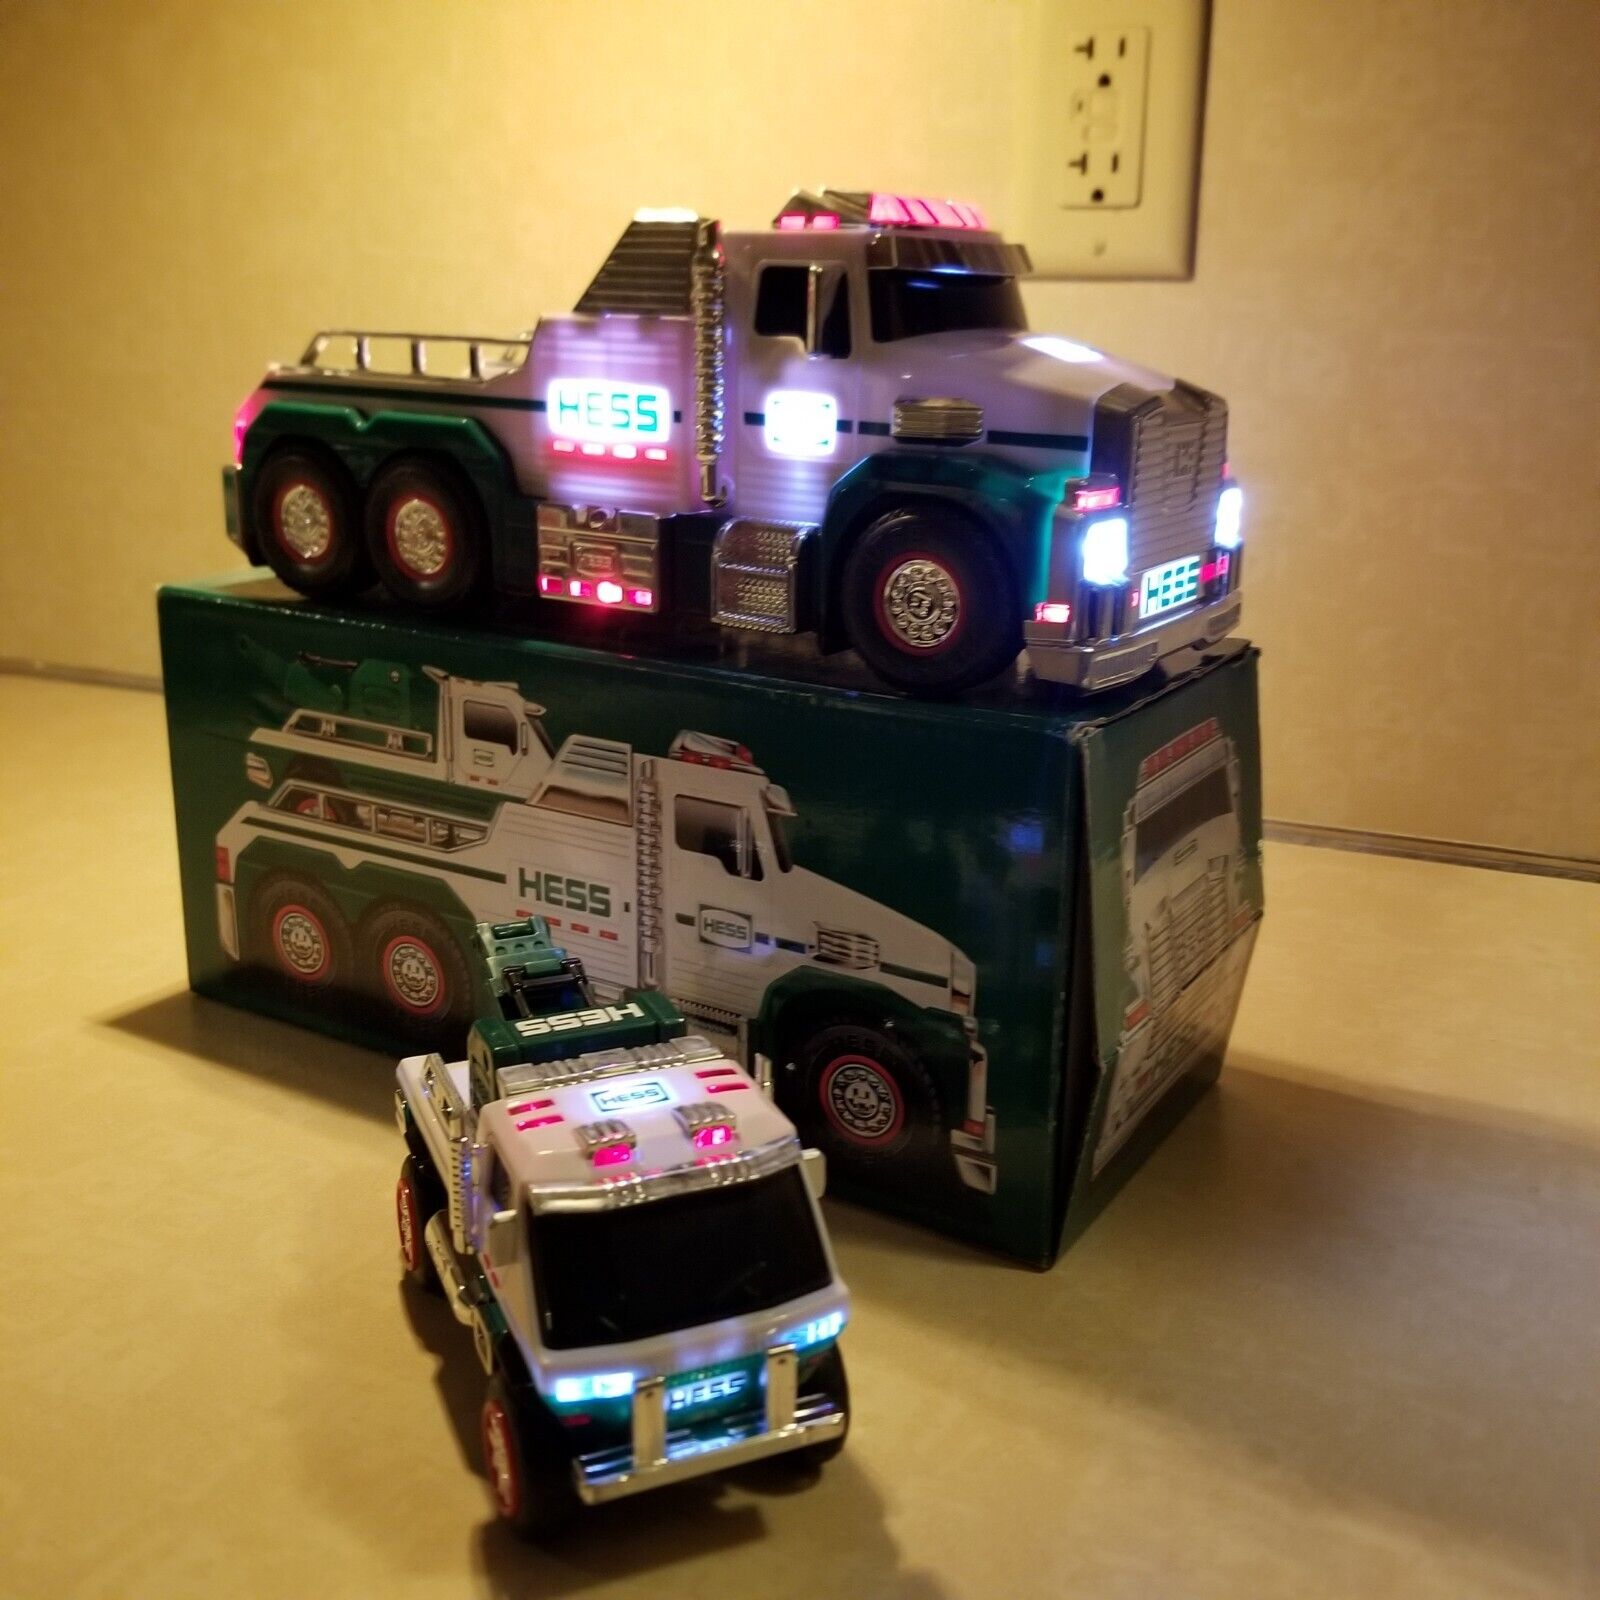 Hess 2019 Tow Truck Rescue Team